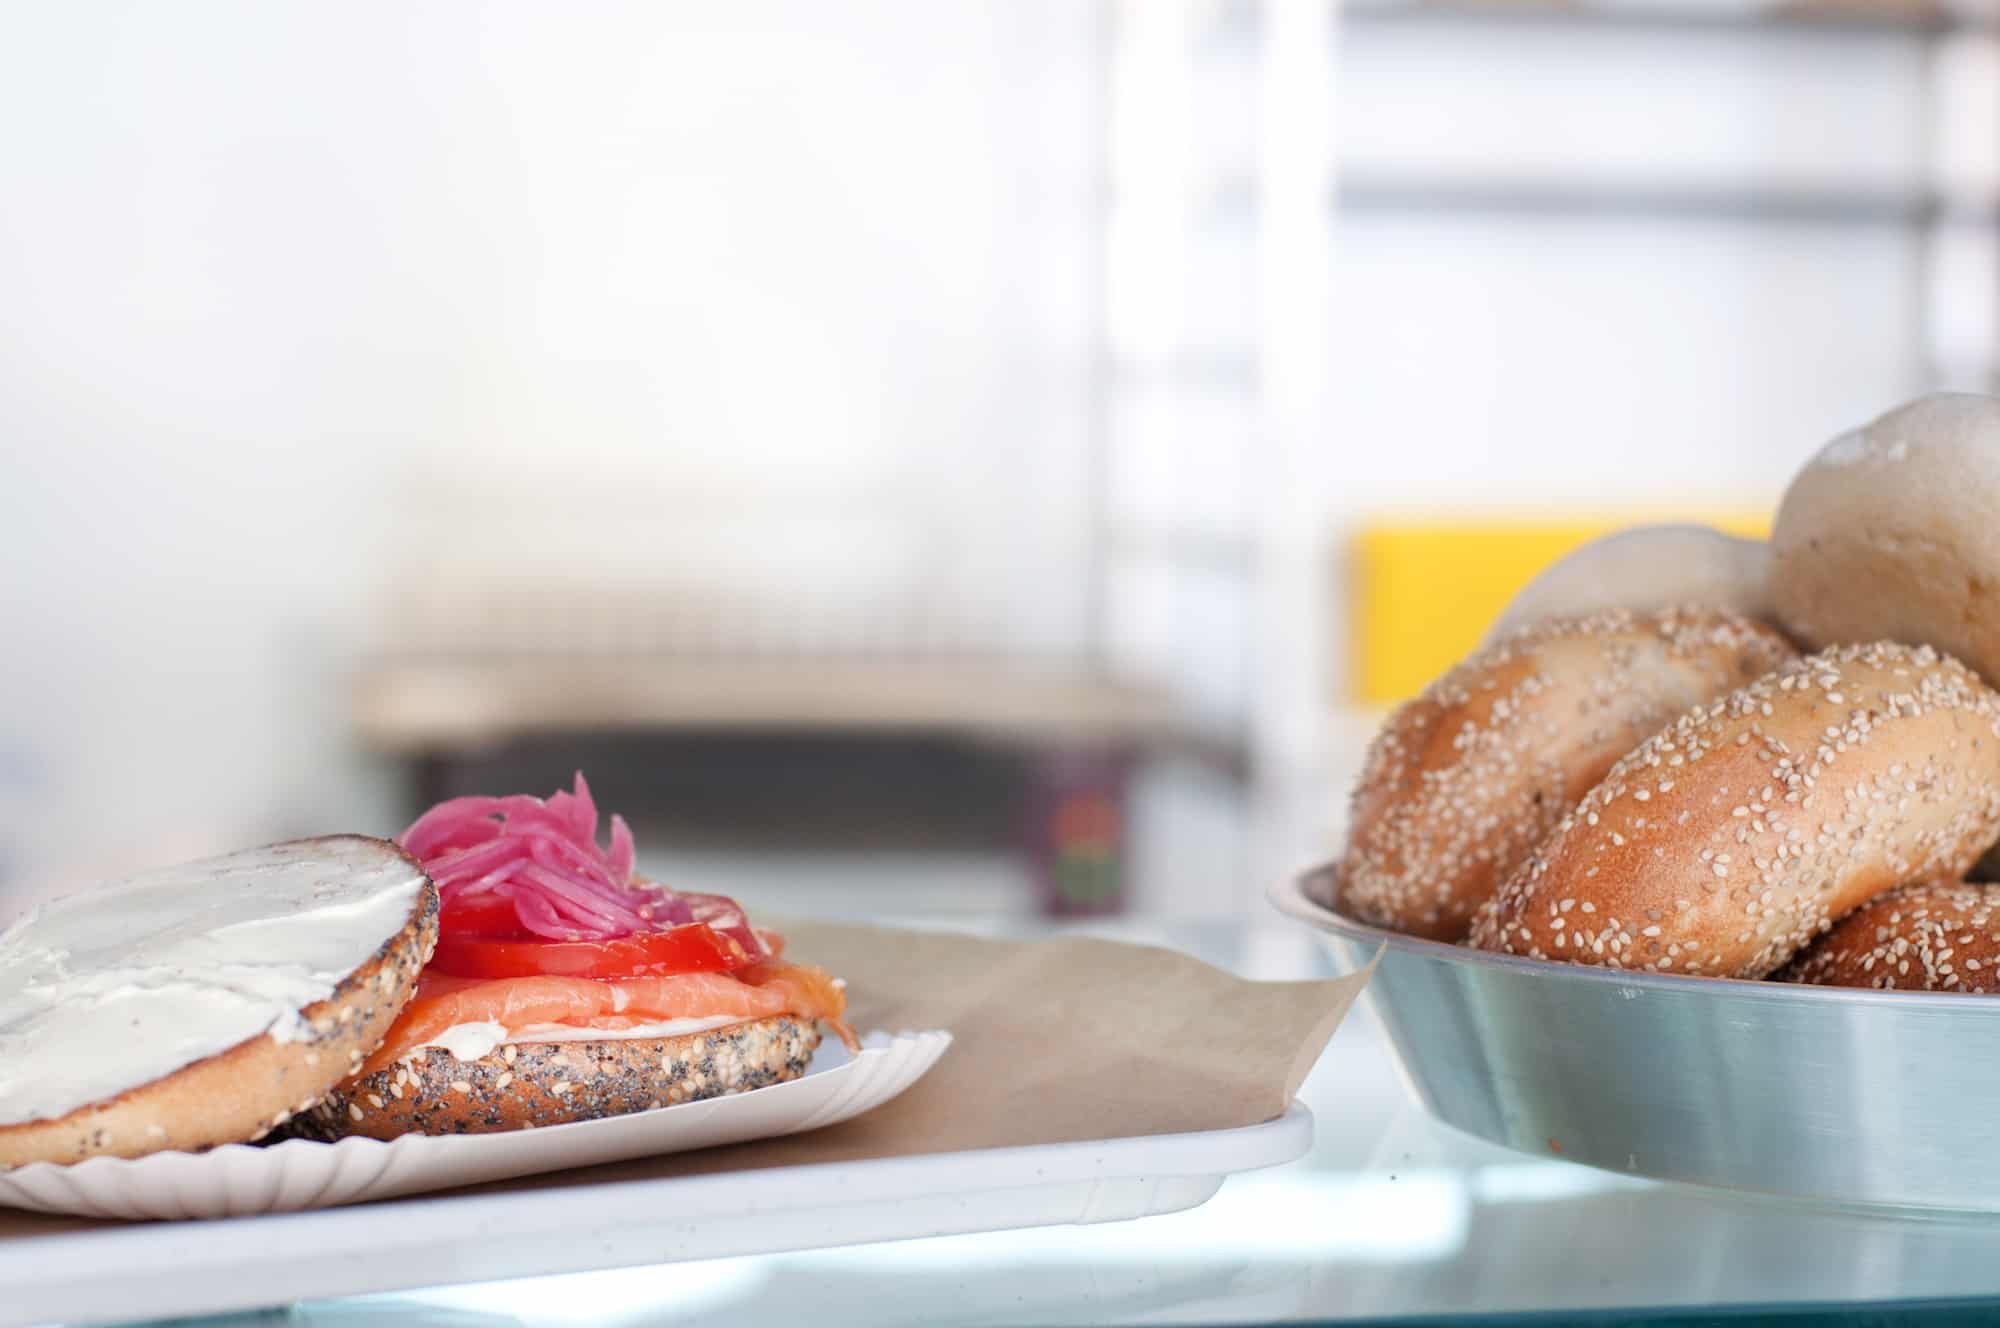 HiP Paris Blog rounds up the top brunch spots in Paris, like Bob's Bakeshop for the fresh bagels filled with salmon and cream cheese.